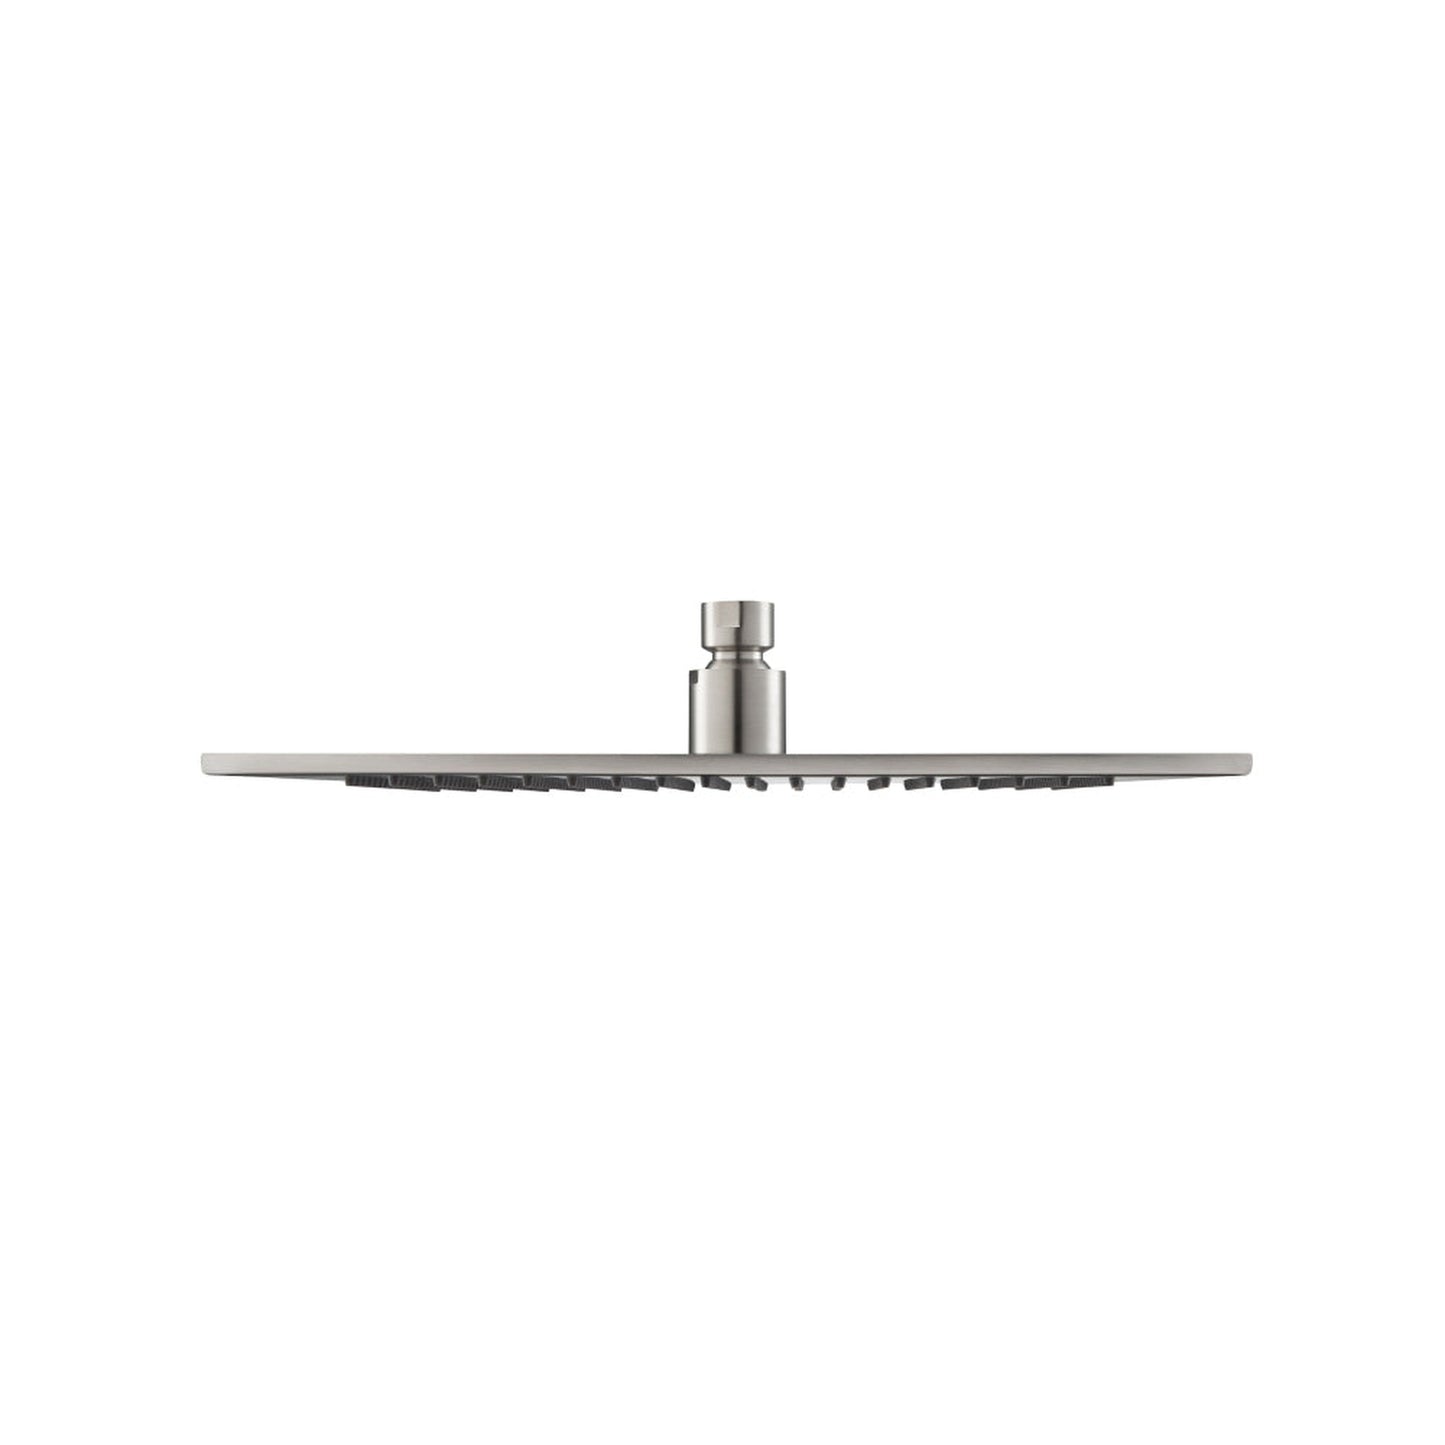 Isenberg Universal Fixtures 12" Single Function Square Brushed Nickel PVD Solid Brass Rain Shower Head With 16" Wall Mounted Shower Arm and Adjustable Flange